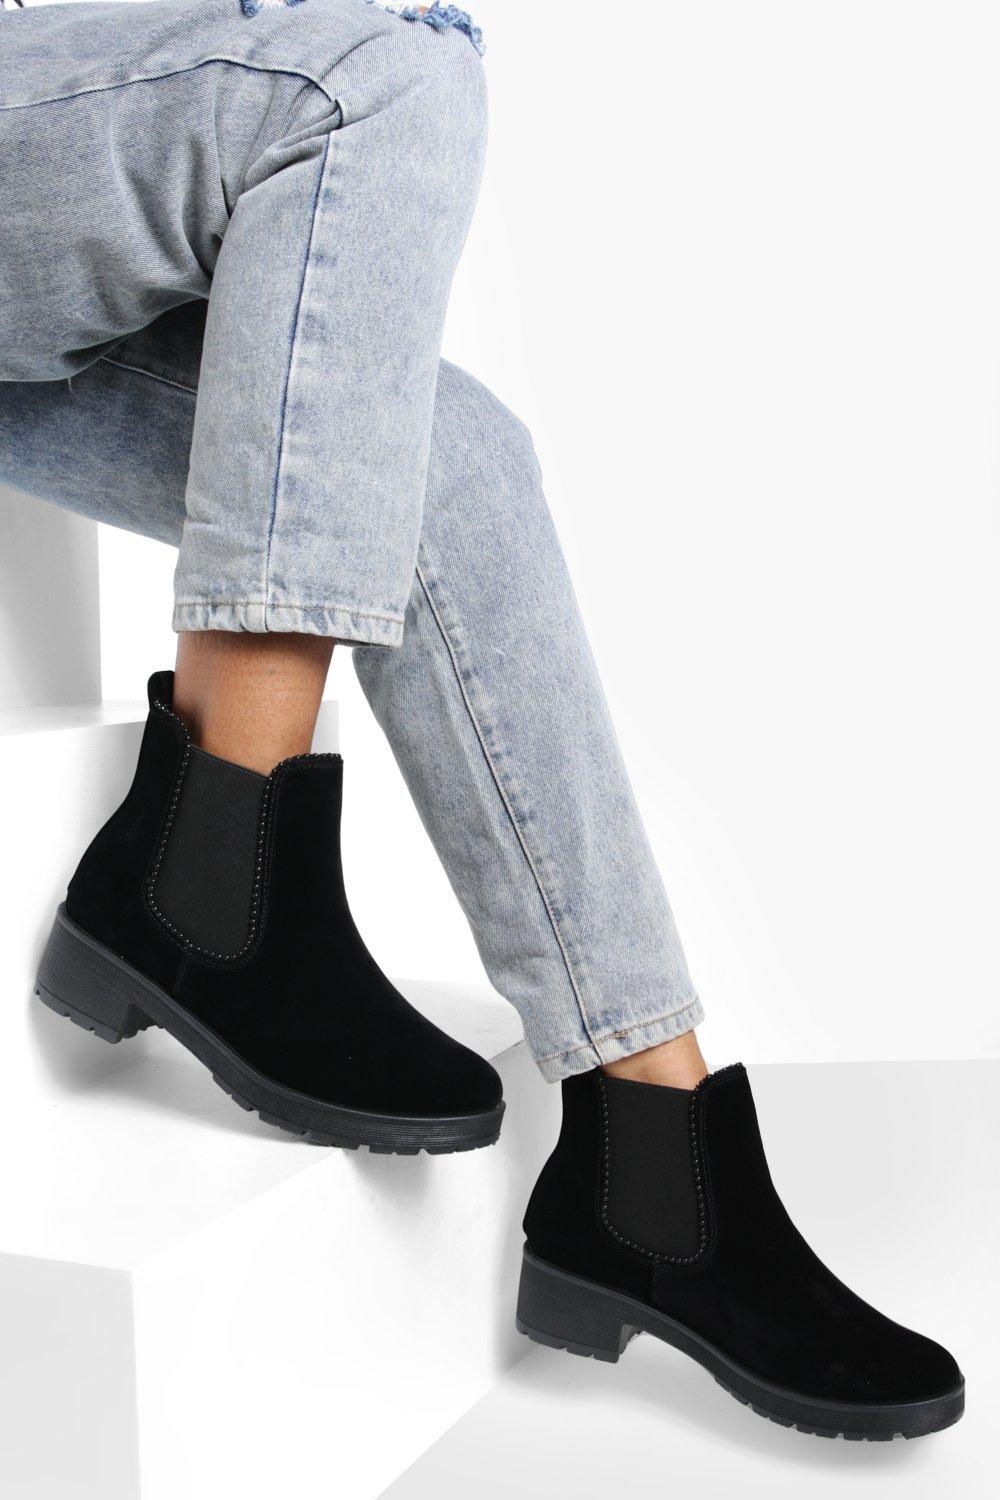 Ribbed Detail Chunky Chelsea Boots boohoo